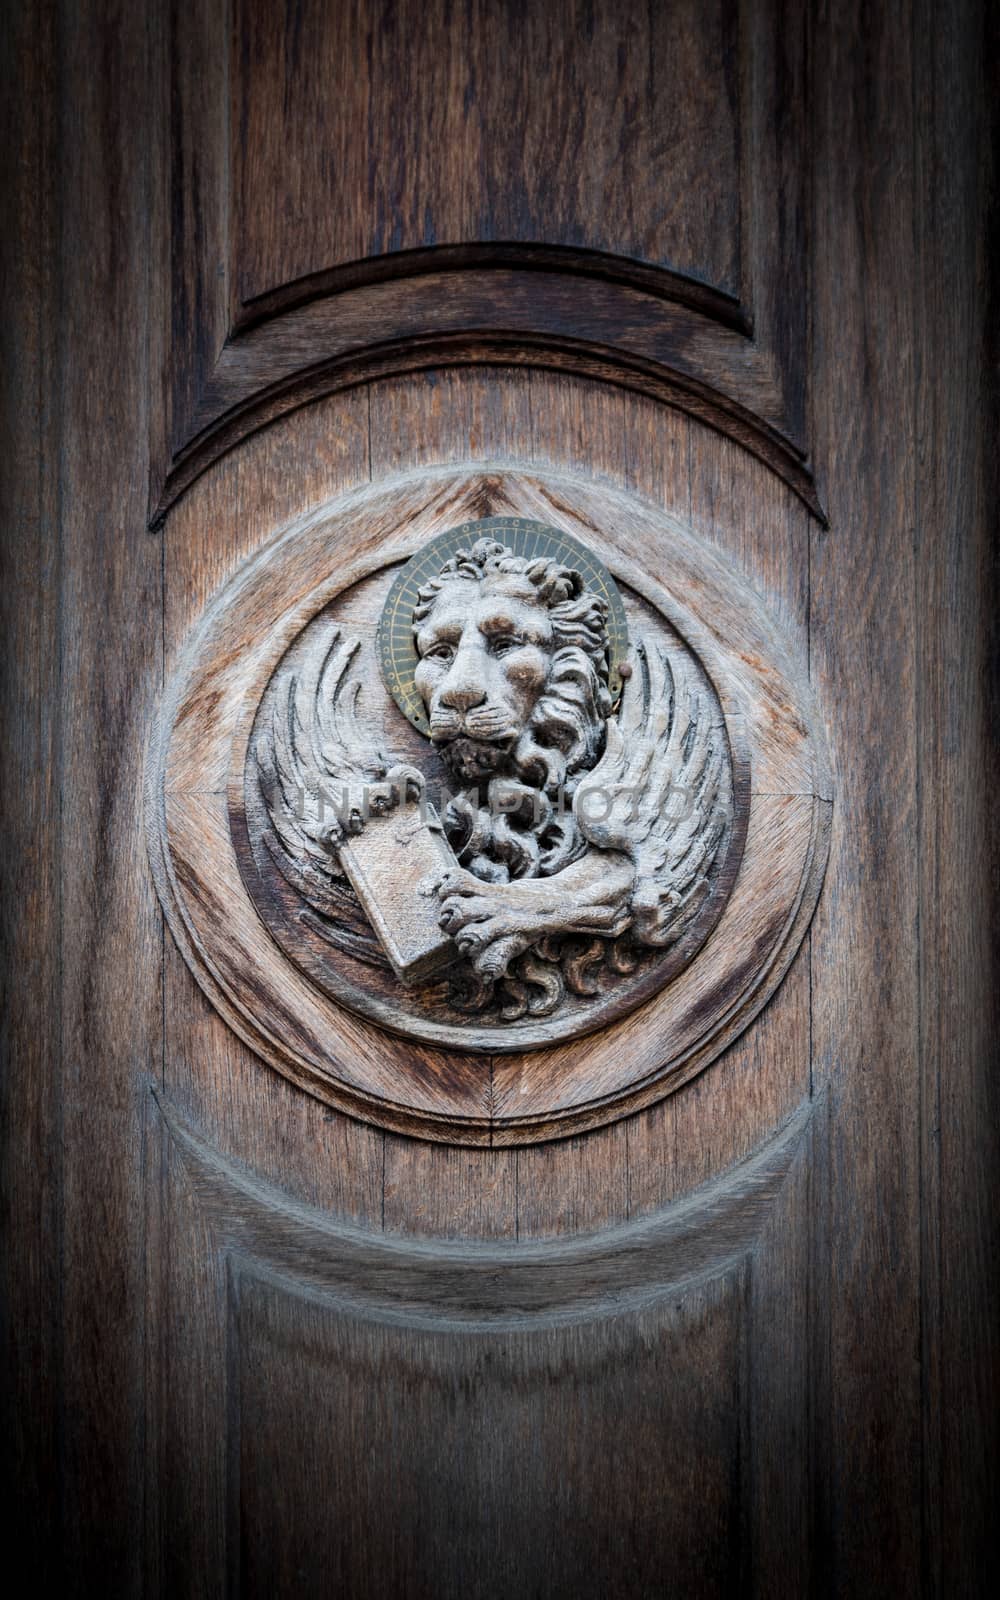 The winged lion of St. Mark, the symbol of the Venetian Republic, engraved on a portal of an old church.